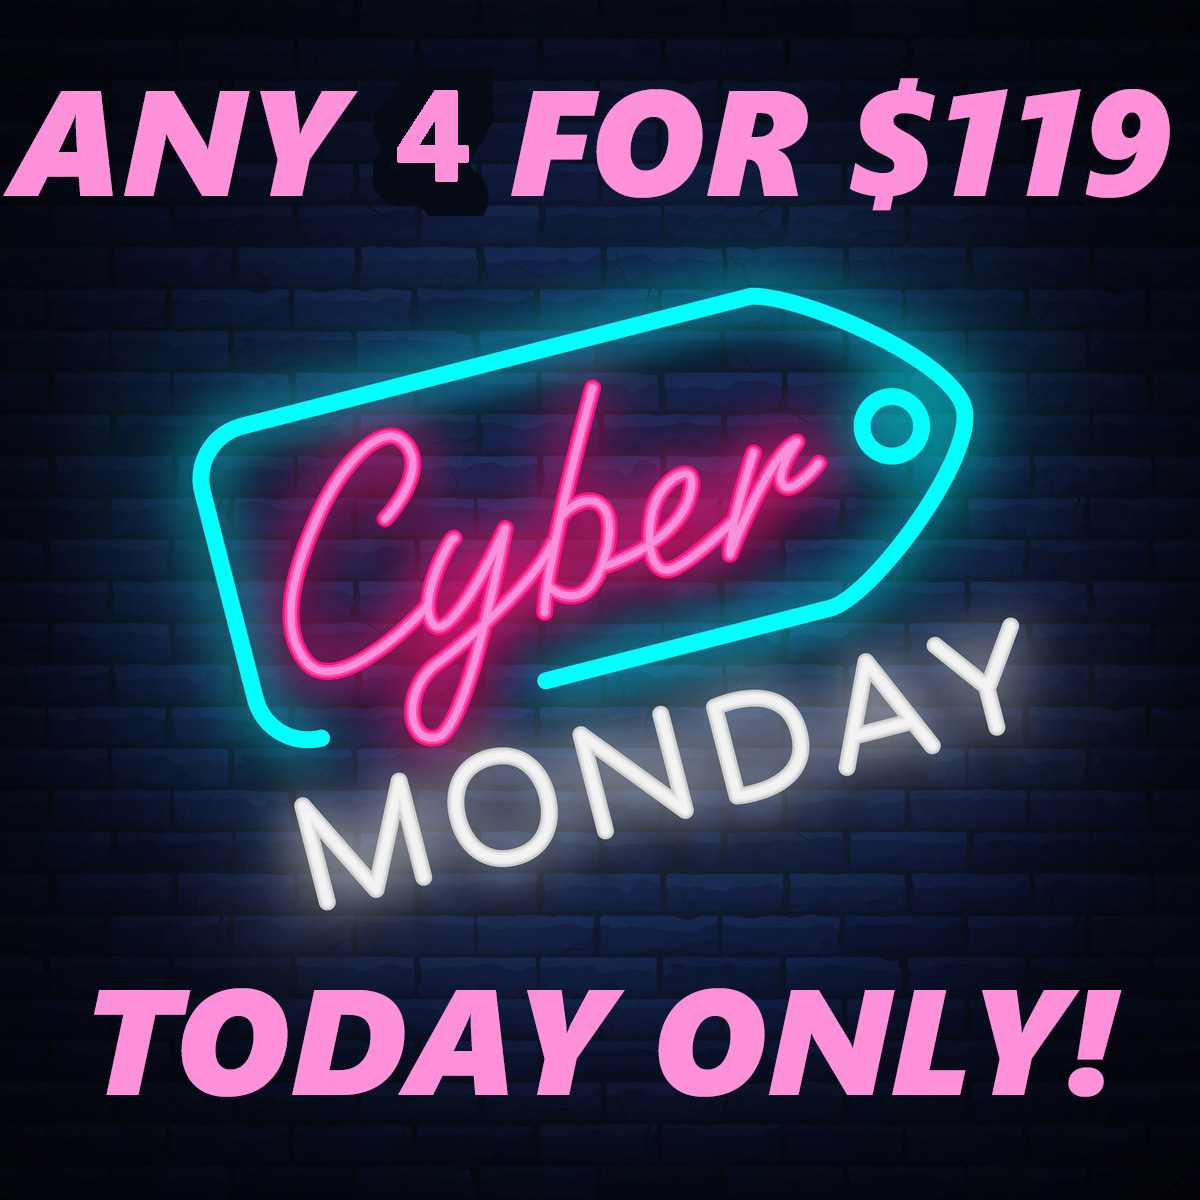 Primary image for SUN-TUES ONLY CYBER MONDAY DEAL PICK ANY 4 FOR $119 DEAL BEST OFFERS MAGICK 